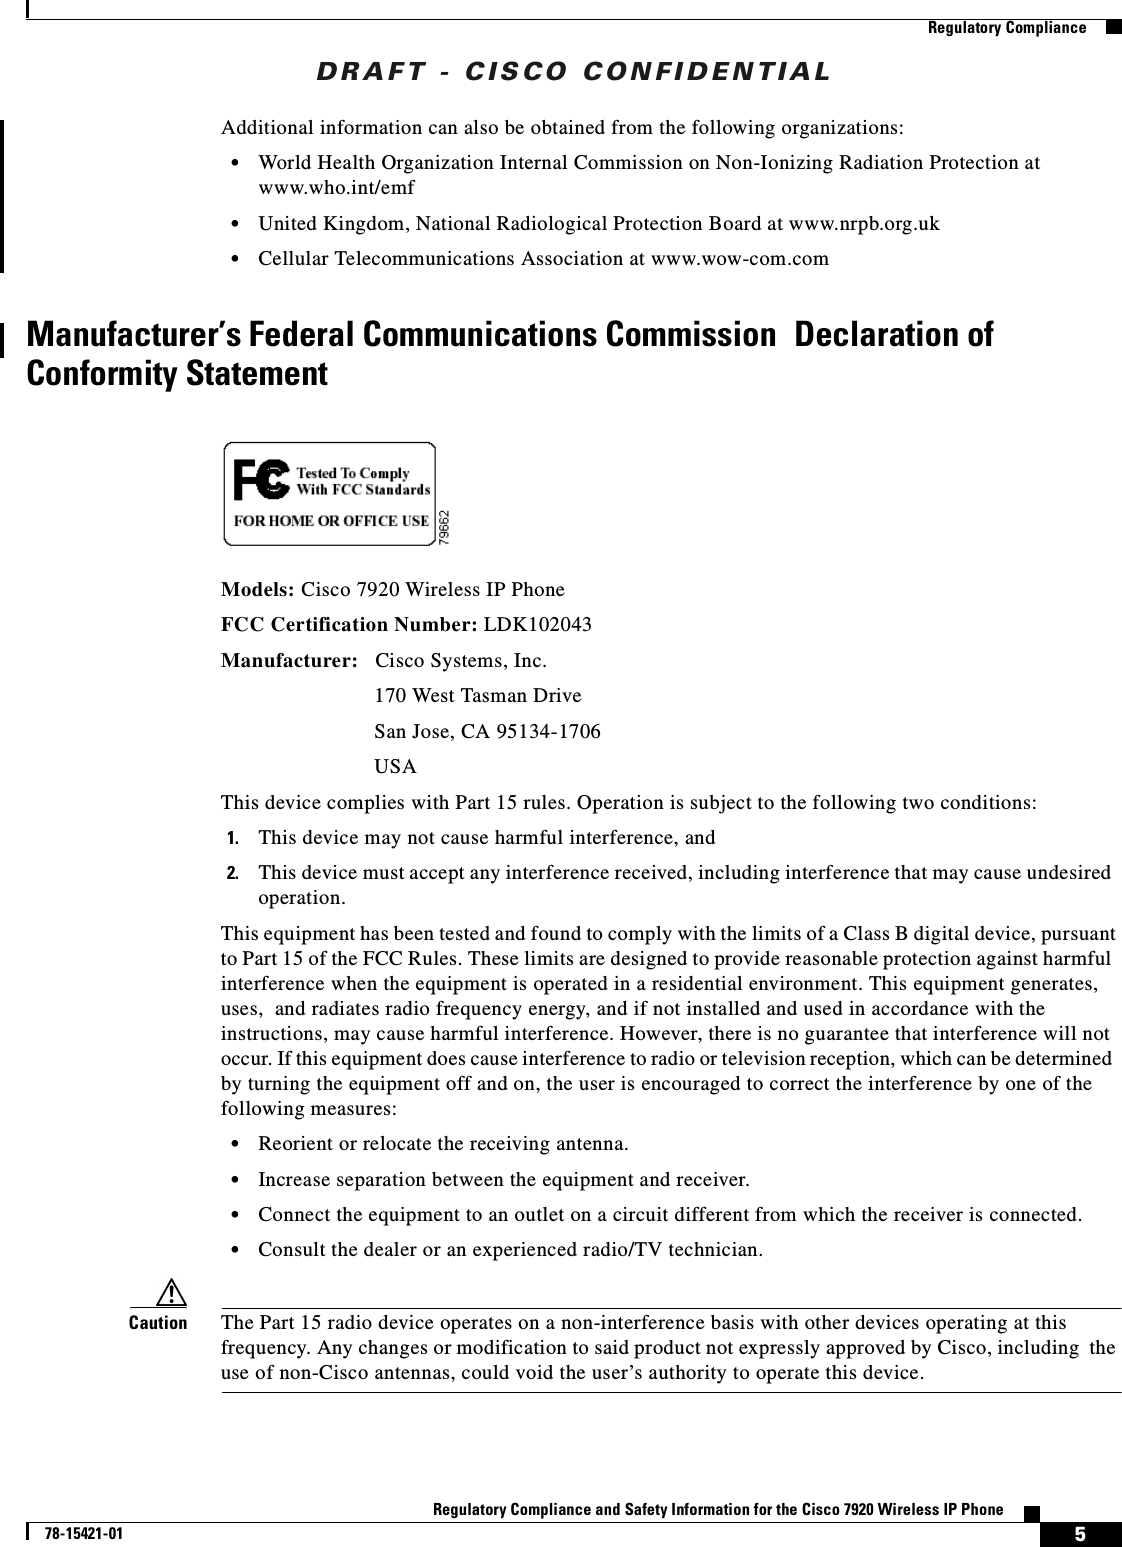 DRAFT - CISCO CONFIDENTIAL5Regulatory Compliance and Safety Information for the Cisco 7920 Wireless IP Phone78-15421-01Regulatory ComplianceAdditional information can also be obtained from the following organizations:•World Health Organization Internal Commission on Non-Ionizing Radiation Protection at www.who.int/emf•United Kingdom, National Radiological Protection Board at www.nrpb.org.uk•Cellular Telecommunications Association at www.wow-com.comManufacturer’s Federal Communications Commission Declaration of Conformity StatementModels: Cisco 7920 Wireless IP PhoneFCC Certification Number: LDK102043Manufacturer:  Cisco Systems, Inc.170 West Tasman DriveSan Jose, CA 95134-1706USAThis device complies with Part 15 rules. Operation is subject to the following two conditions:1. This device may not cause harmful interference, and2. This device must accept any interference received, including interference that may cause undesiredoperation.This equipment has been tested and found to comply with the limits of a Class B digital device, pursuant to Part 15 of the FCC Rules. These limits are designed to provide reasonable protection against harmfulinterference when the equipment is operated in a residential environment. This equipment generates,uses, and radiates radio frequency energy, and if not installed and used in accordance with theinstructions, may cause harmful interference. However, there is no guarantee that interference will notoccur. If this equipment does cause interference to radio or television reception, which can be determinedby turning the equipment off and on, the user is encouraged to correct the interference by one of thefollowing measures:•Reorient or relocate the receiving antenna.•Increase separation between the equipment and receiver.•Connect the equipment to an outlet on a circuit different from which the receiver is connected.•Consult the dealer or an experienced radio/TV technician.Caution The Part 15 radio device operates on a non-interference basis with other devices operating at thisfrequency. Any changes or modification to said product not expressly approved by Cisco, including the use of non-Cisco antennas, could void the user’s authority to operate this device.